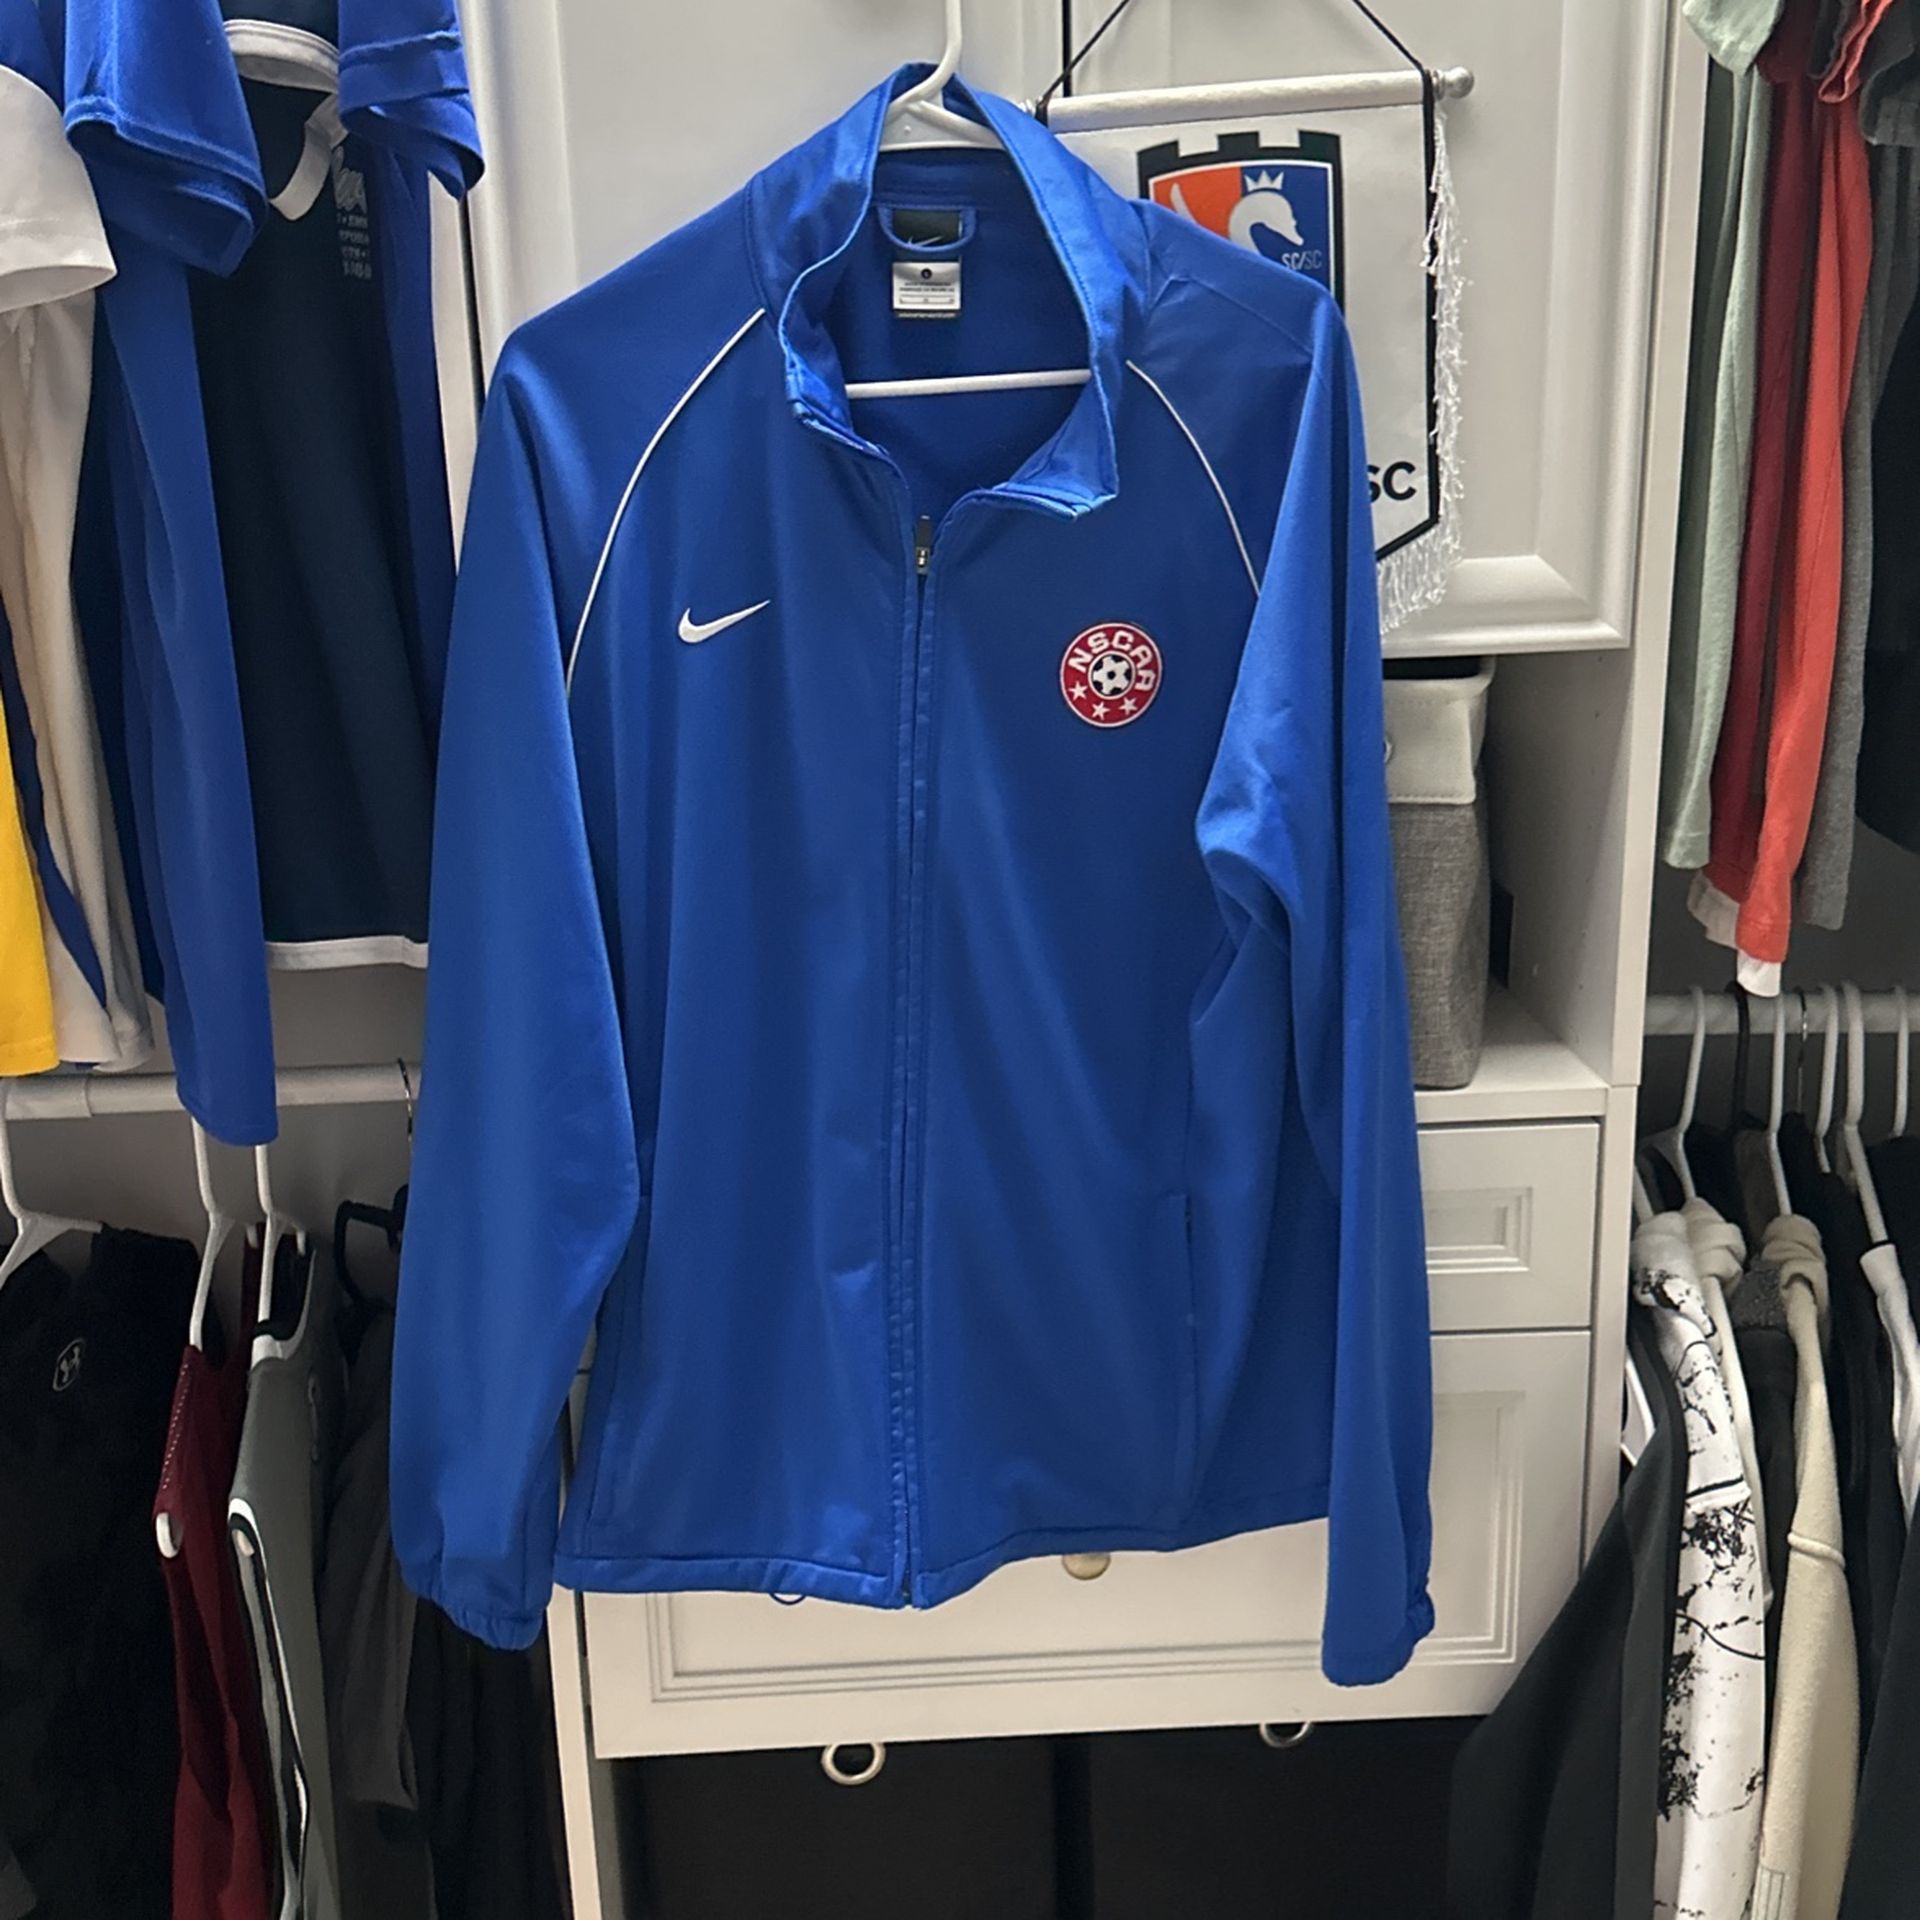 Nike tracksuit top and with nscaa soccer badge